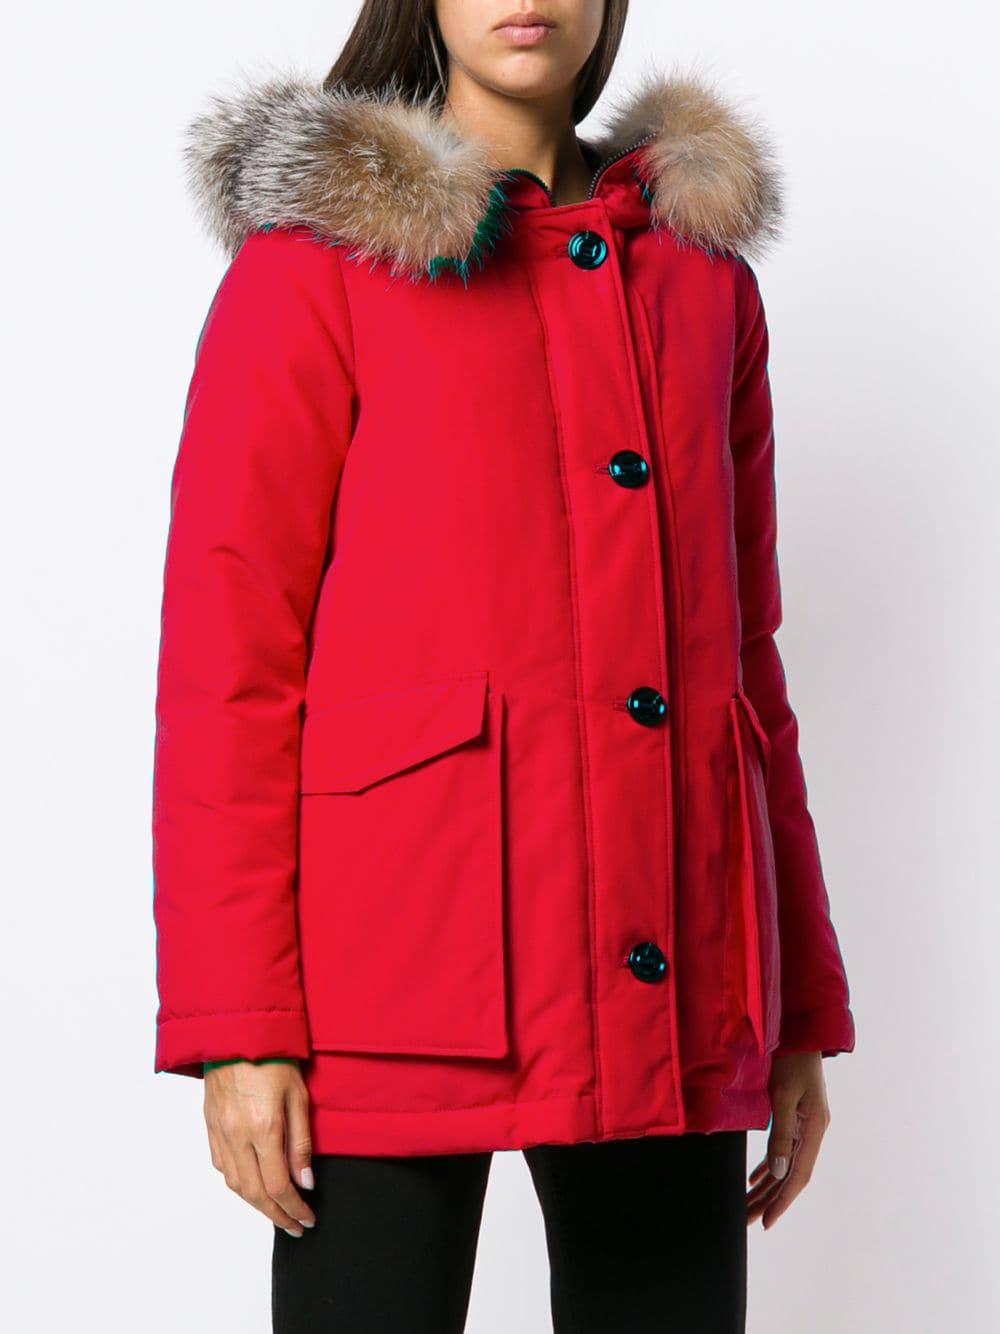 Moncler Courvite Jacket in Red - Lyst